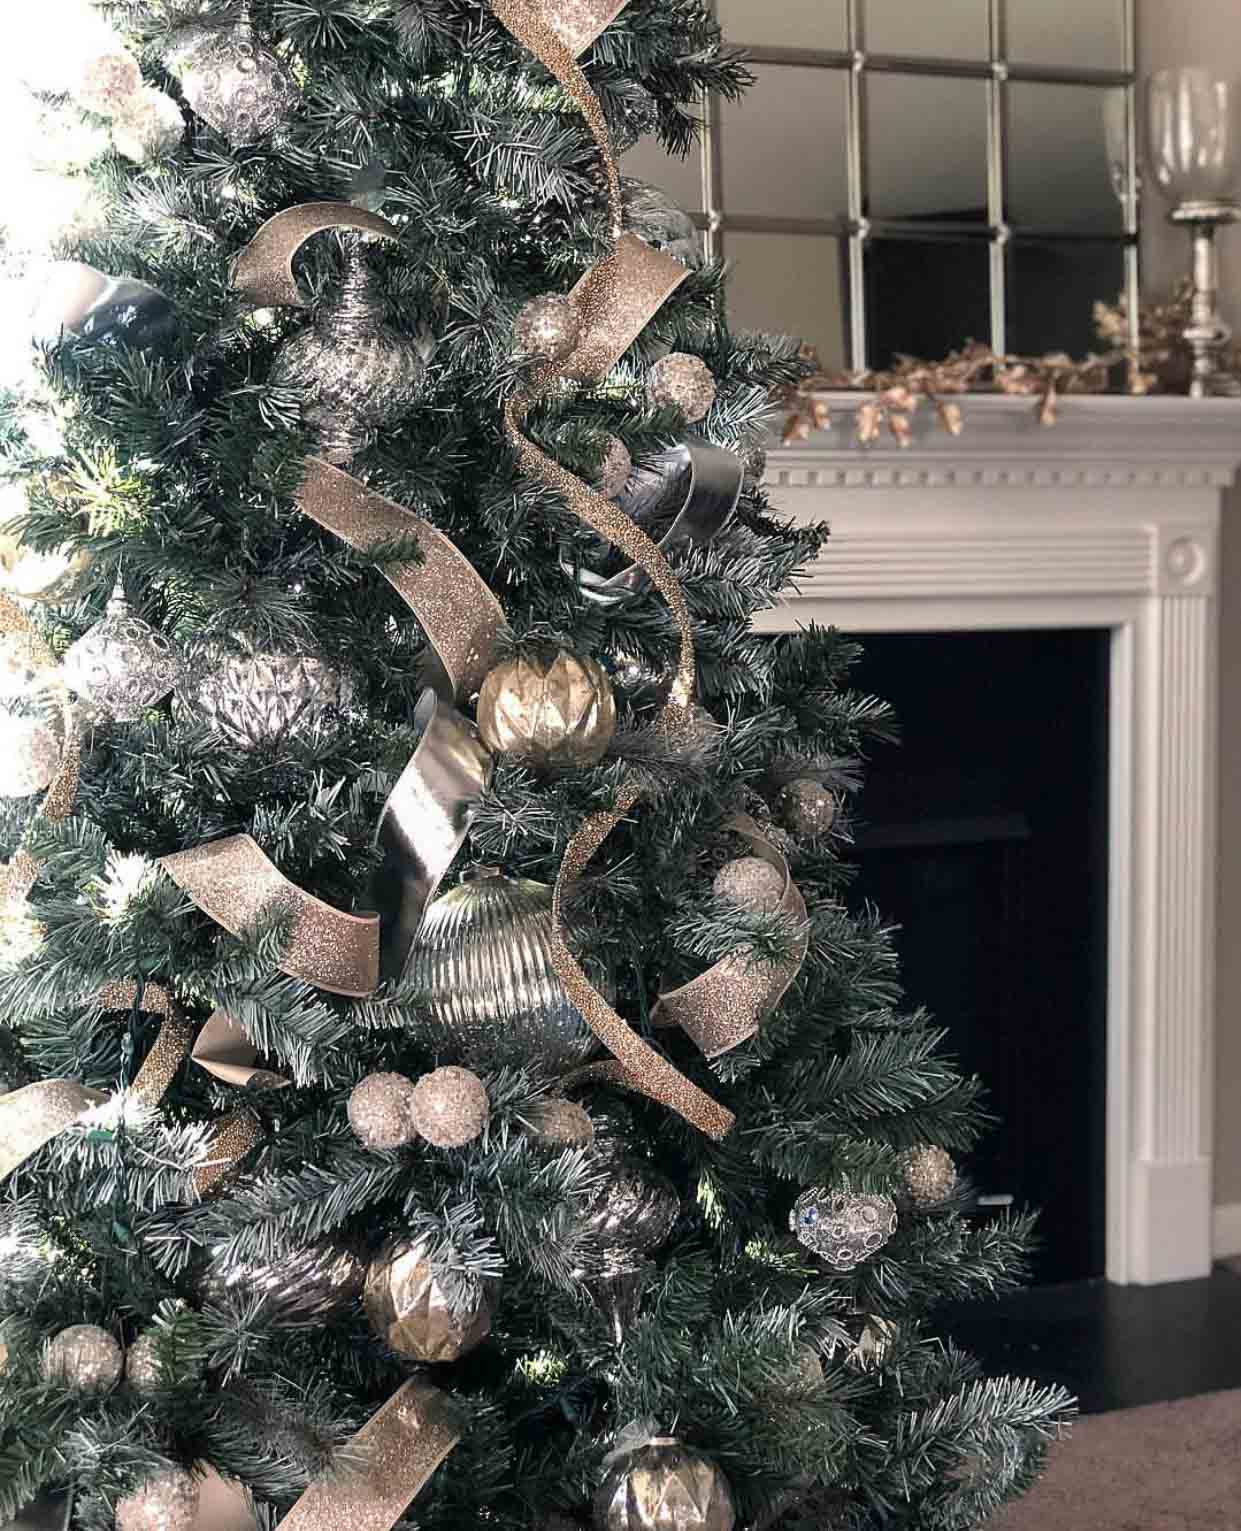 50 Christmas Tree Ideas with Different Themes and Colors